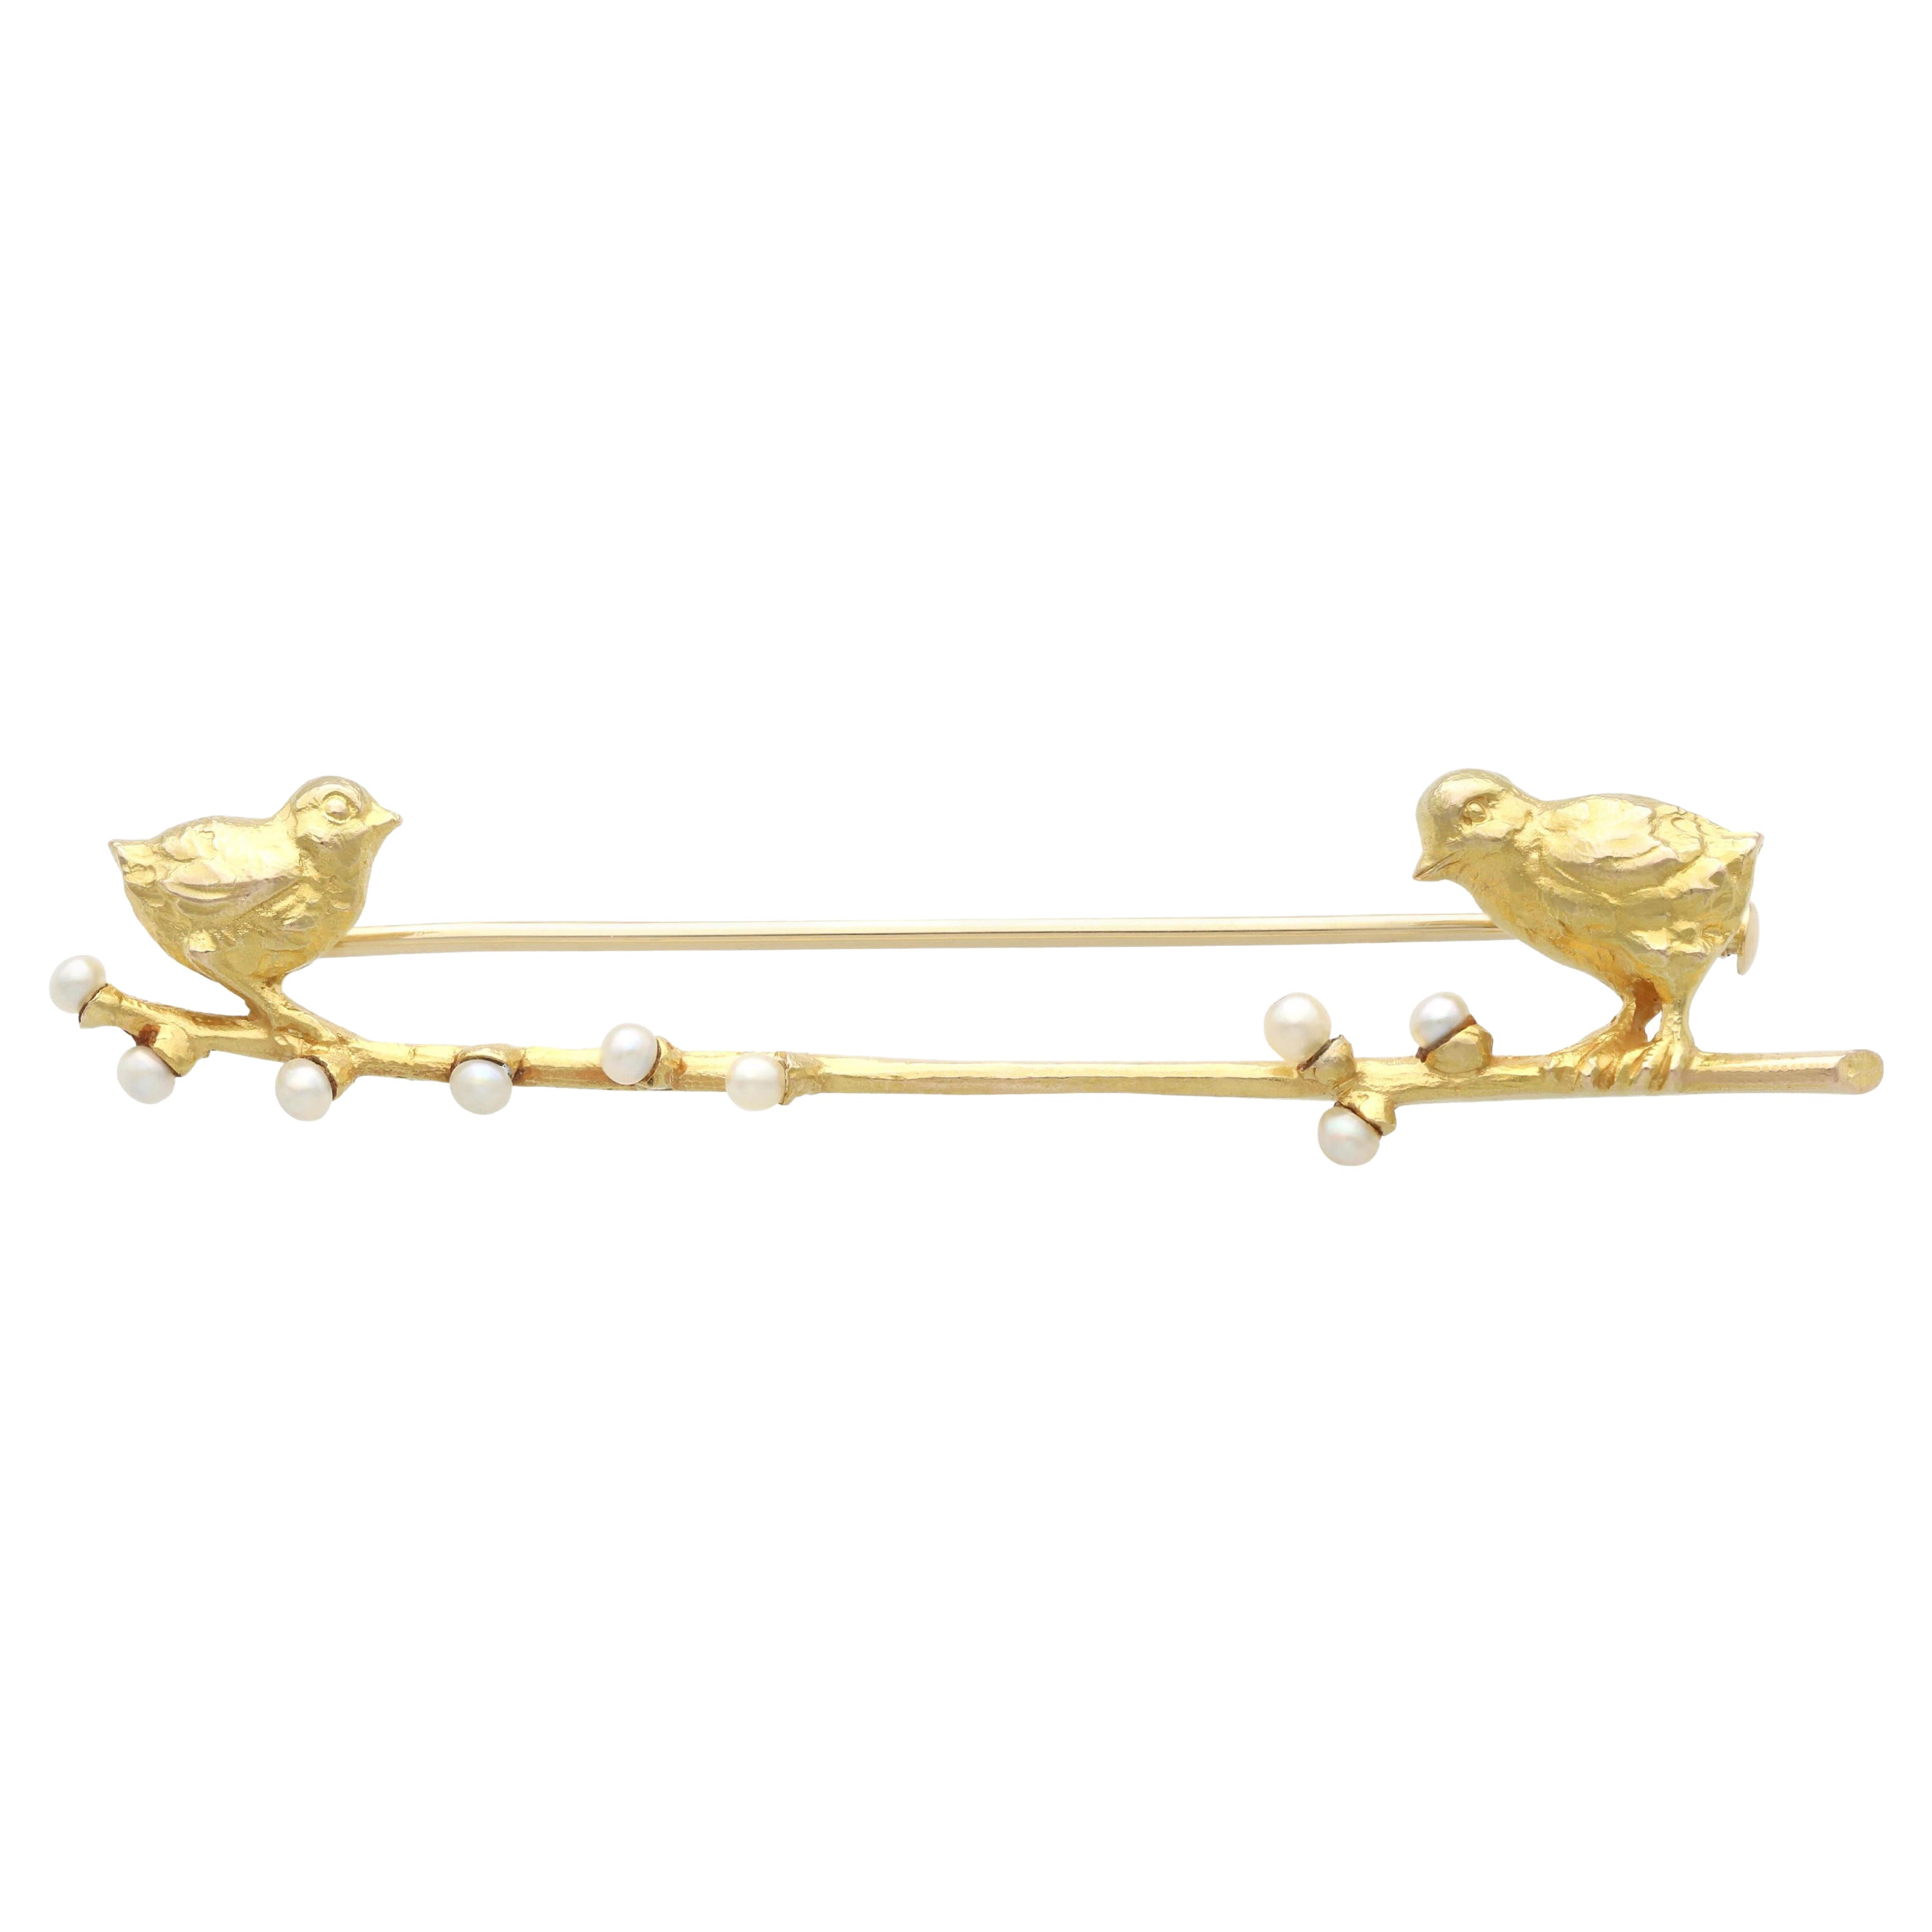 Antique Seed Pearl and Yellow Gold Bird Bar Brooch